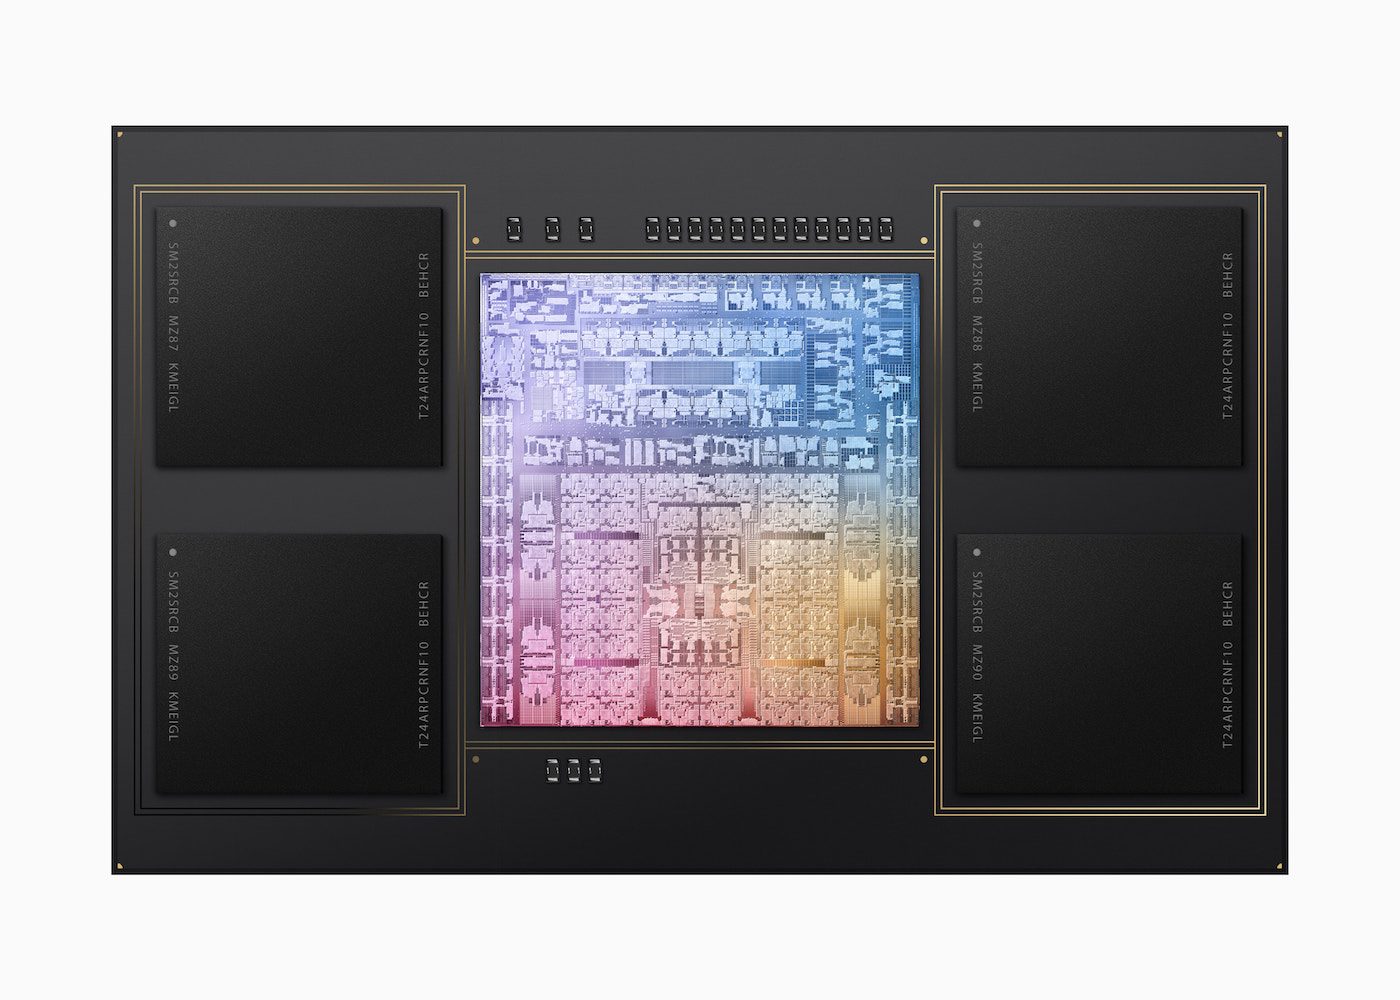 Apple M3 Chip Series Unified Memory Architecture M3 Max 231030